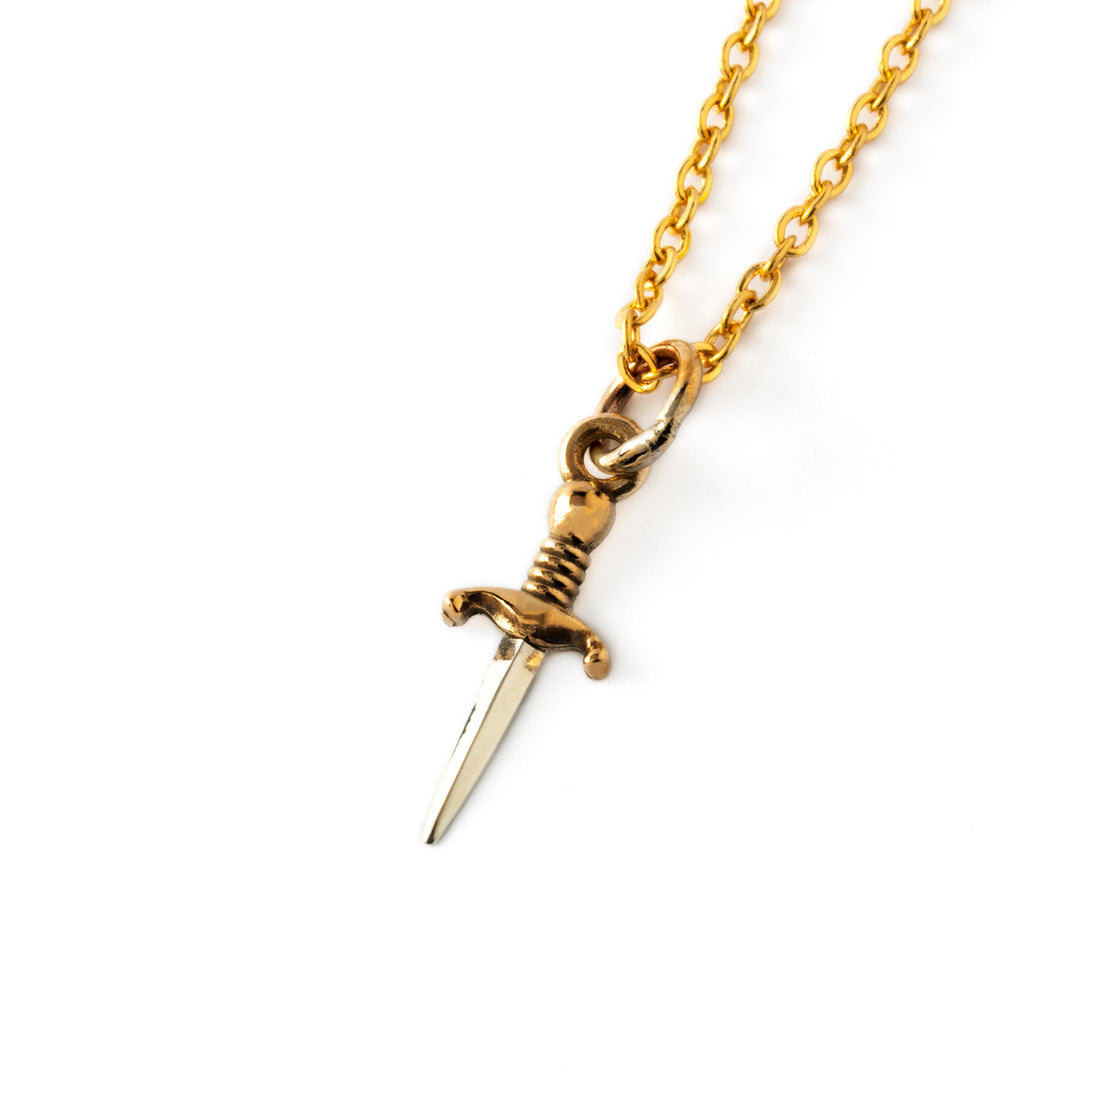  Gawain dagger charm necklace right side view